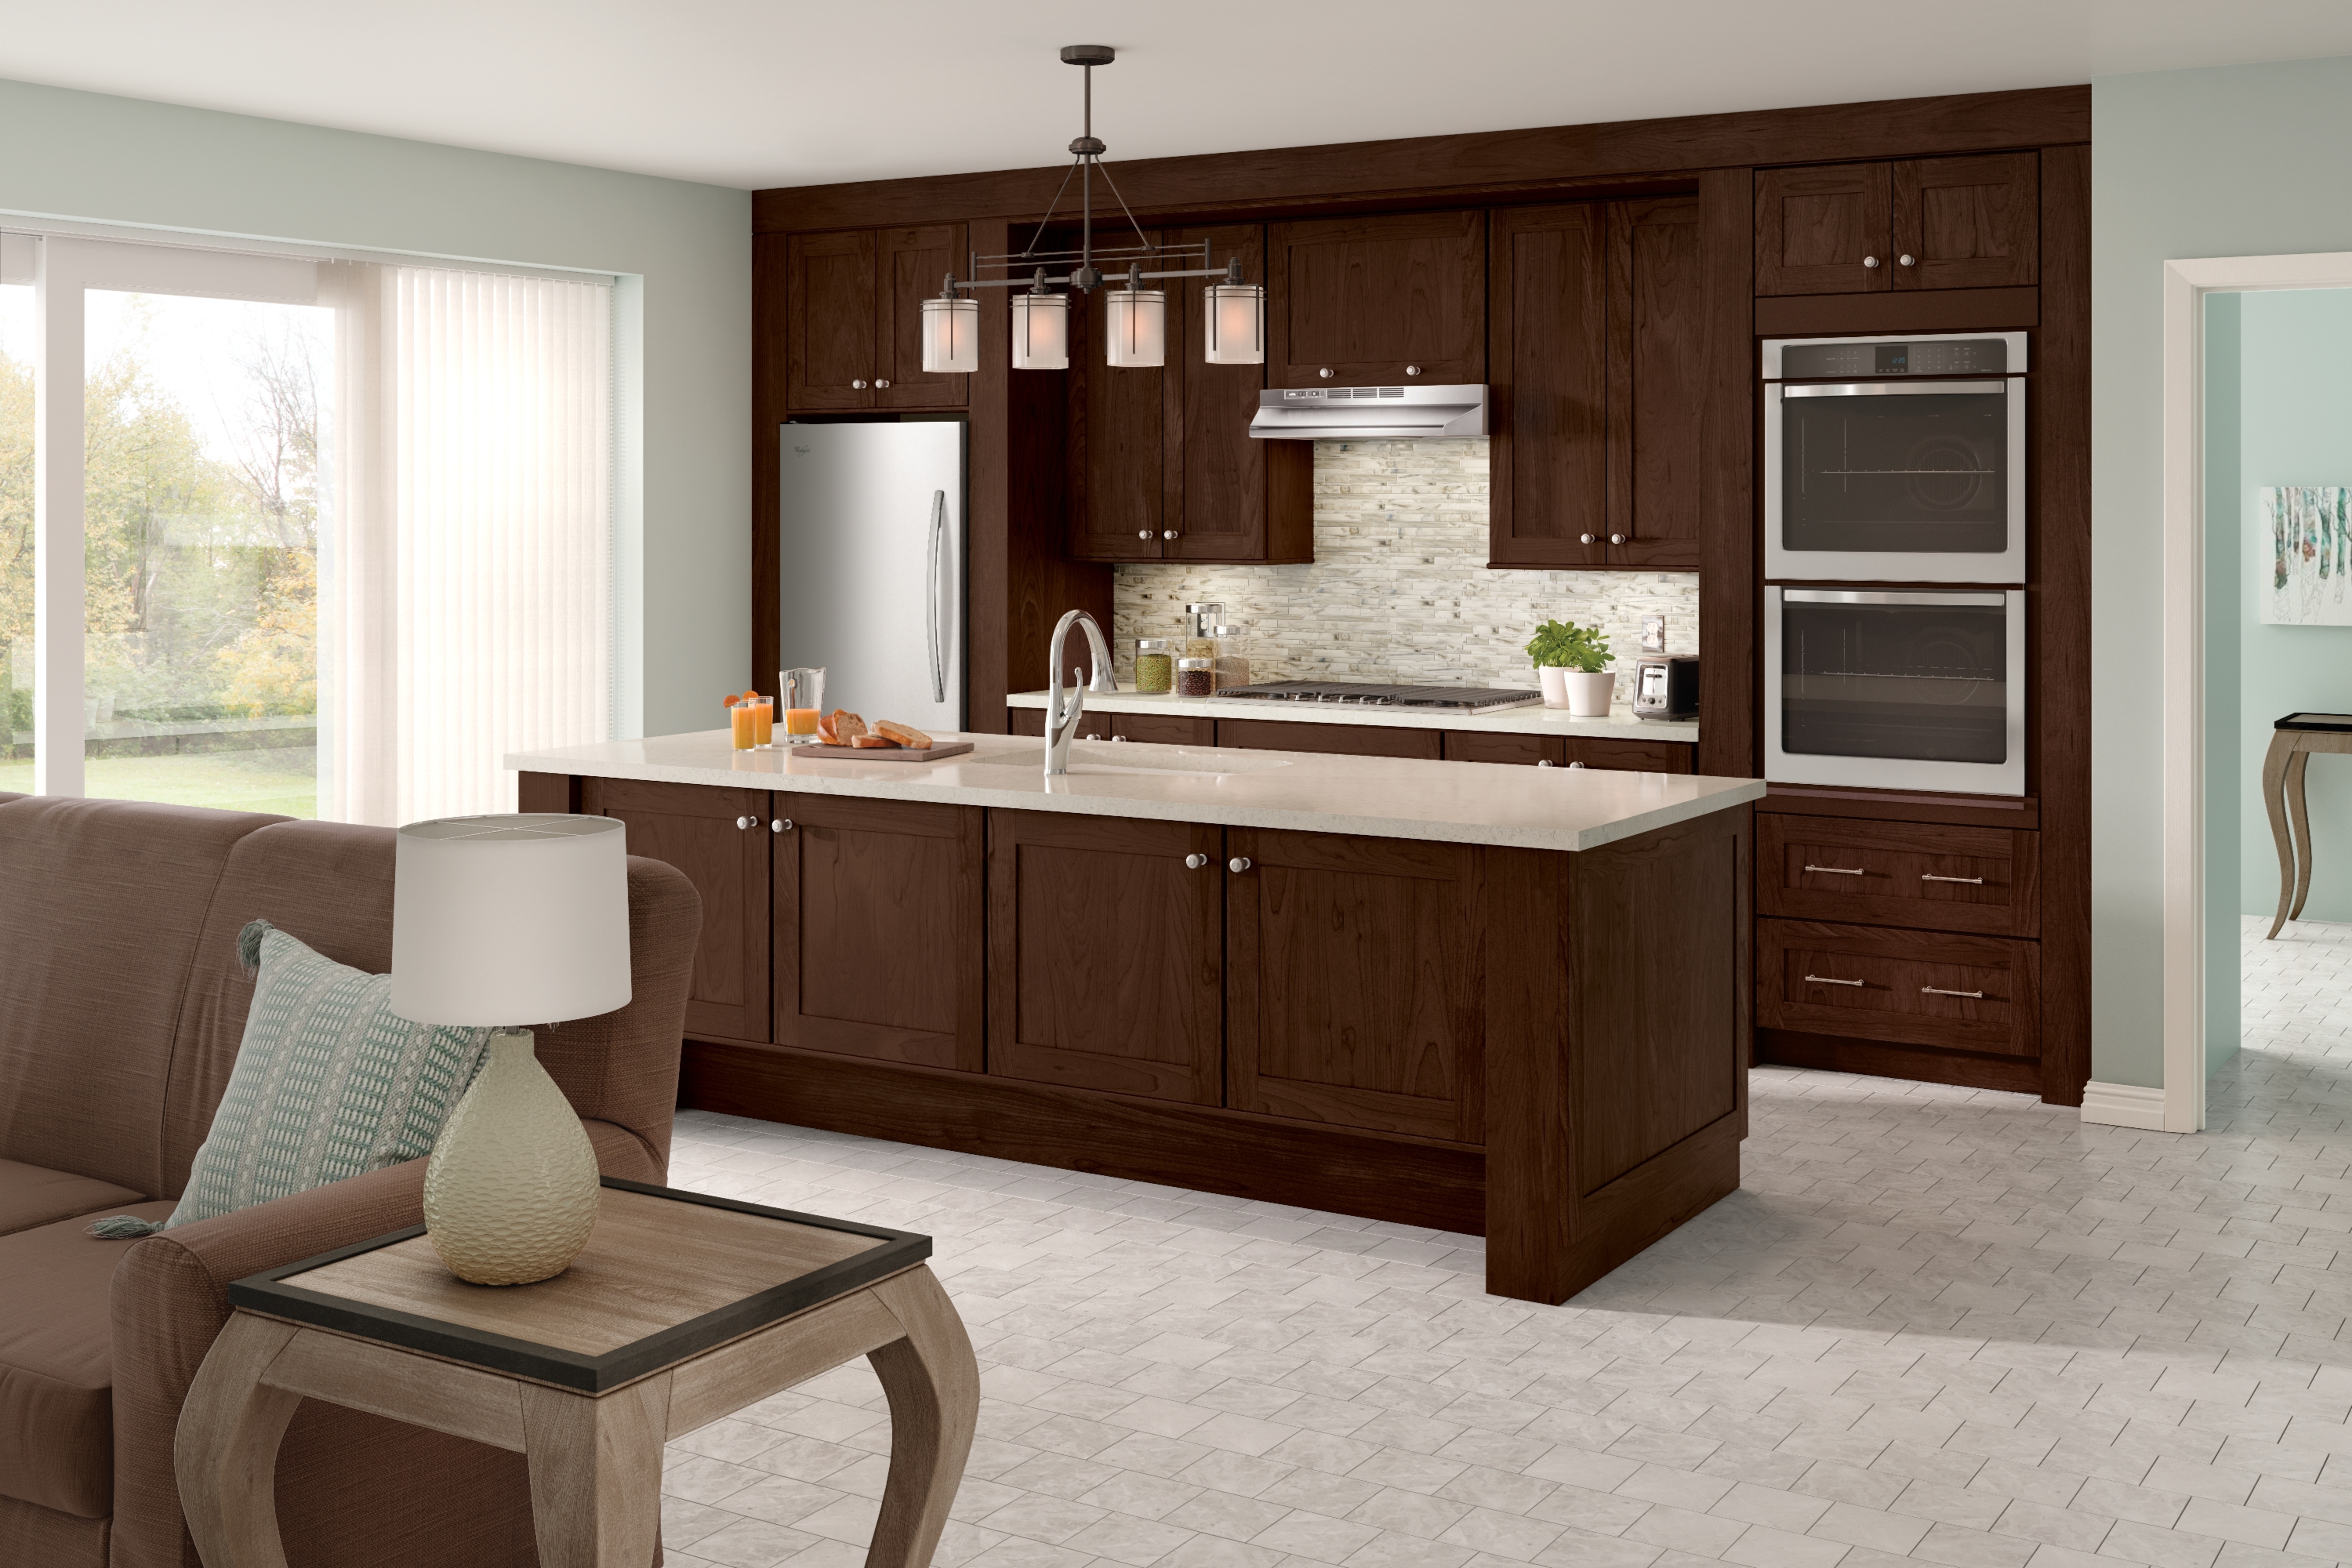  cardell kitchen cabinets